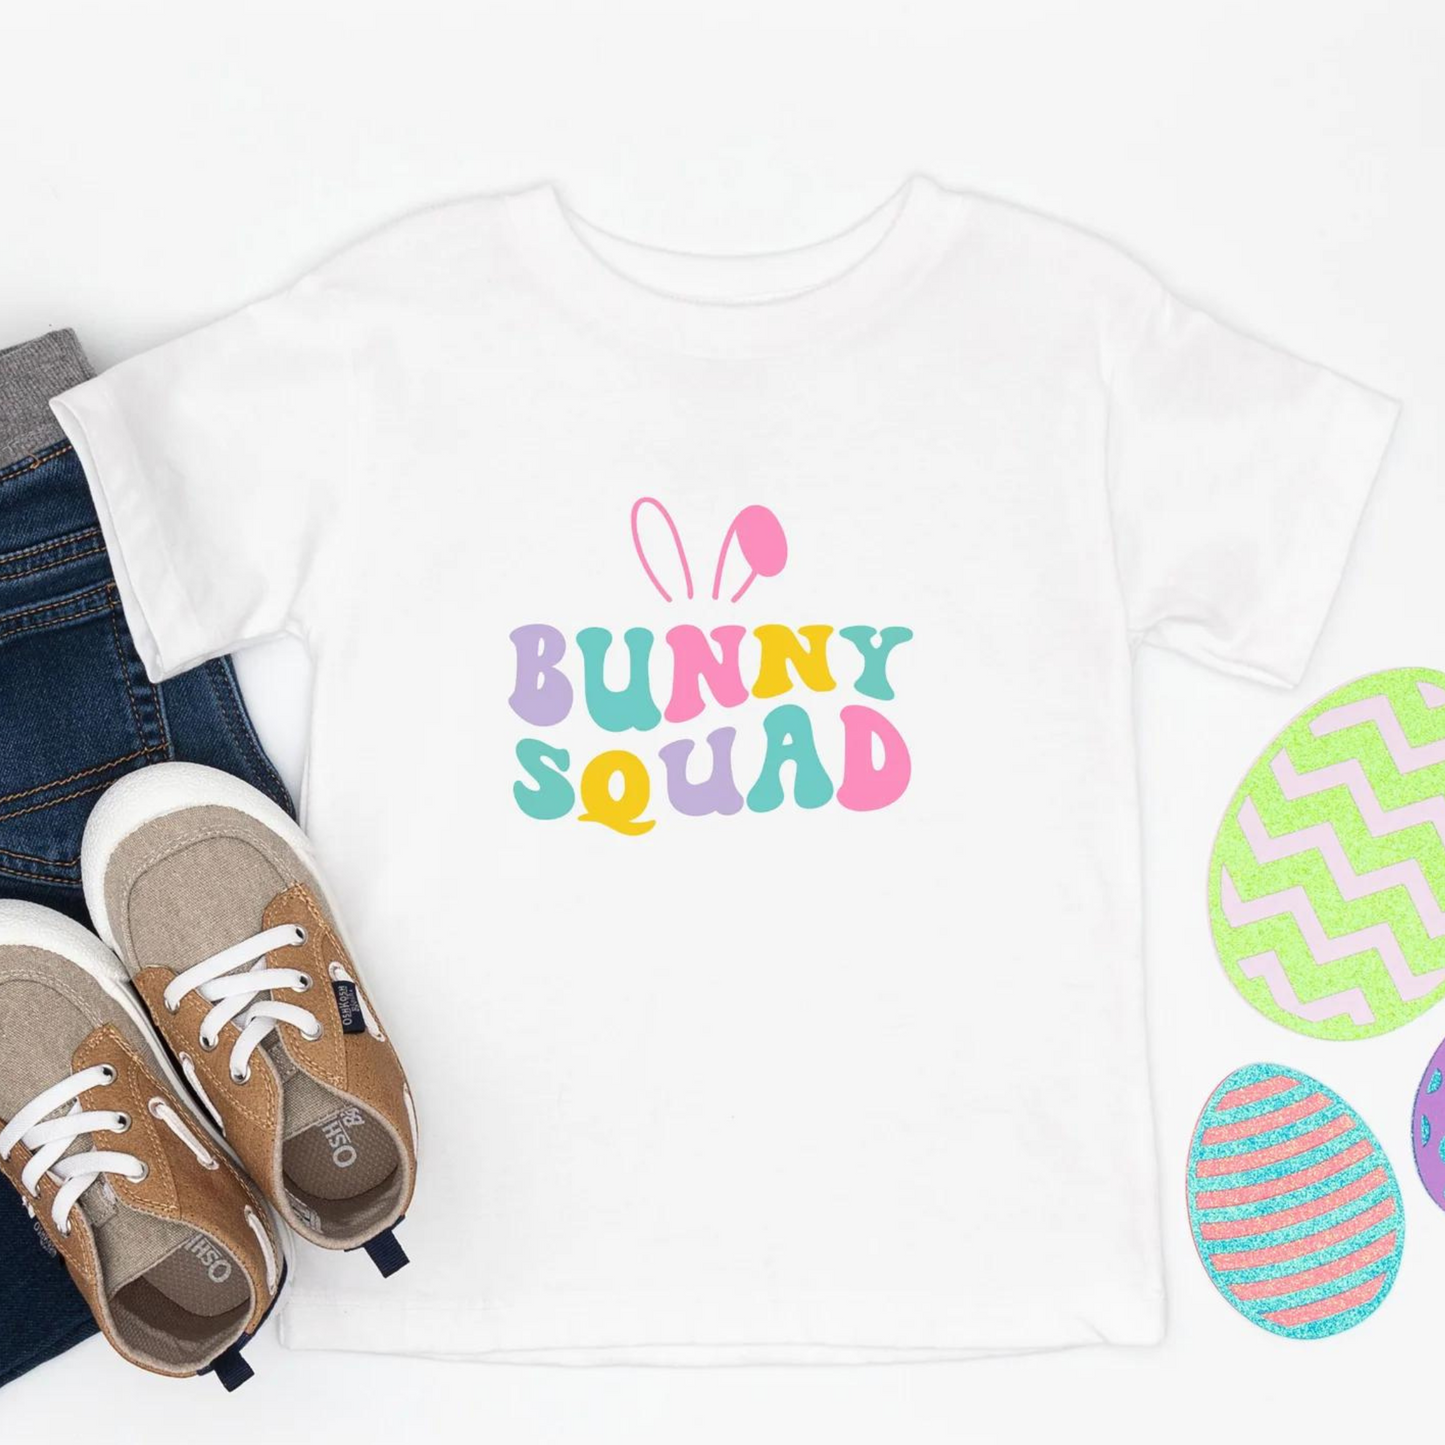 Bunny Squad Colorful Short Sleeve Tee, White